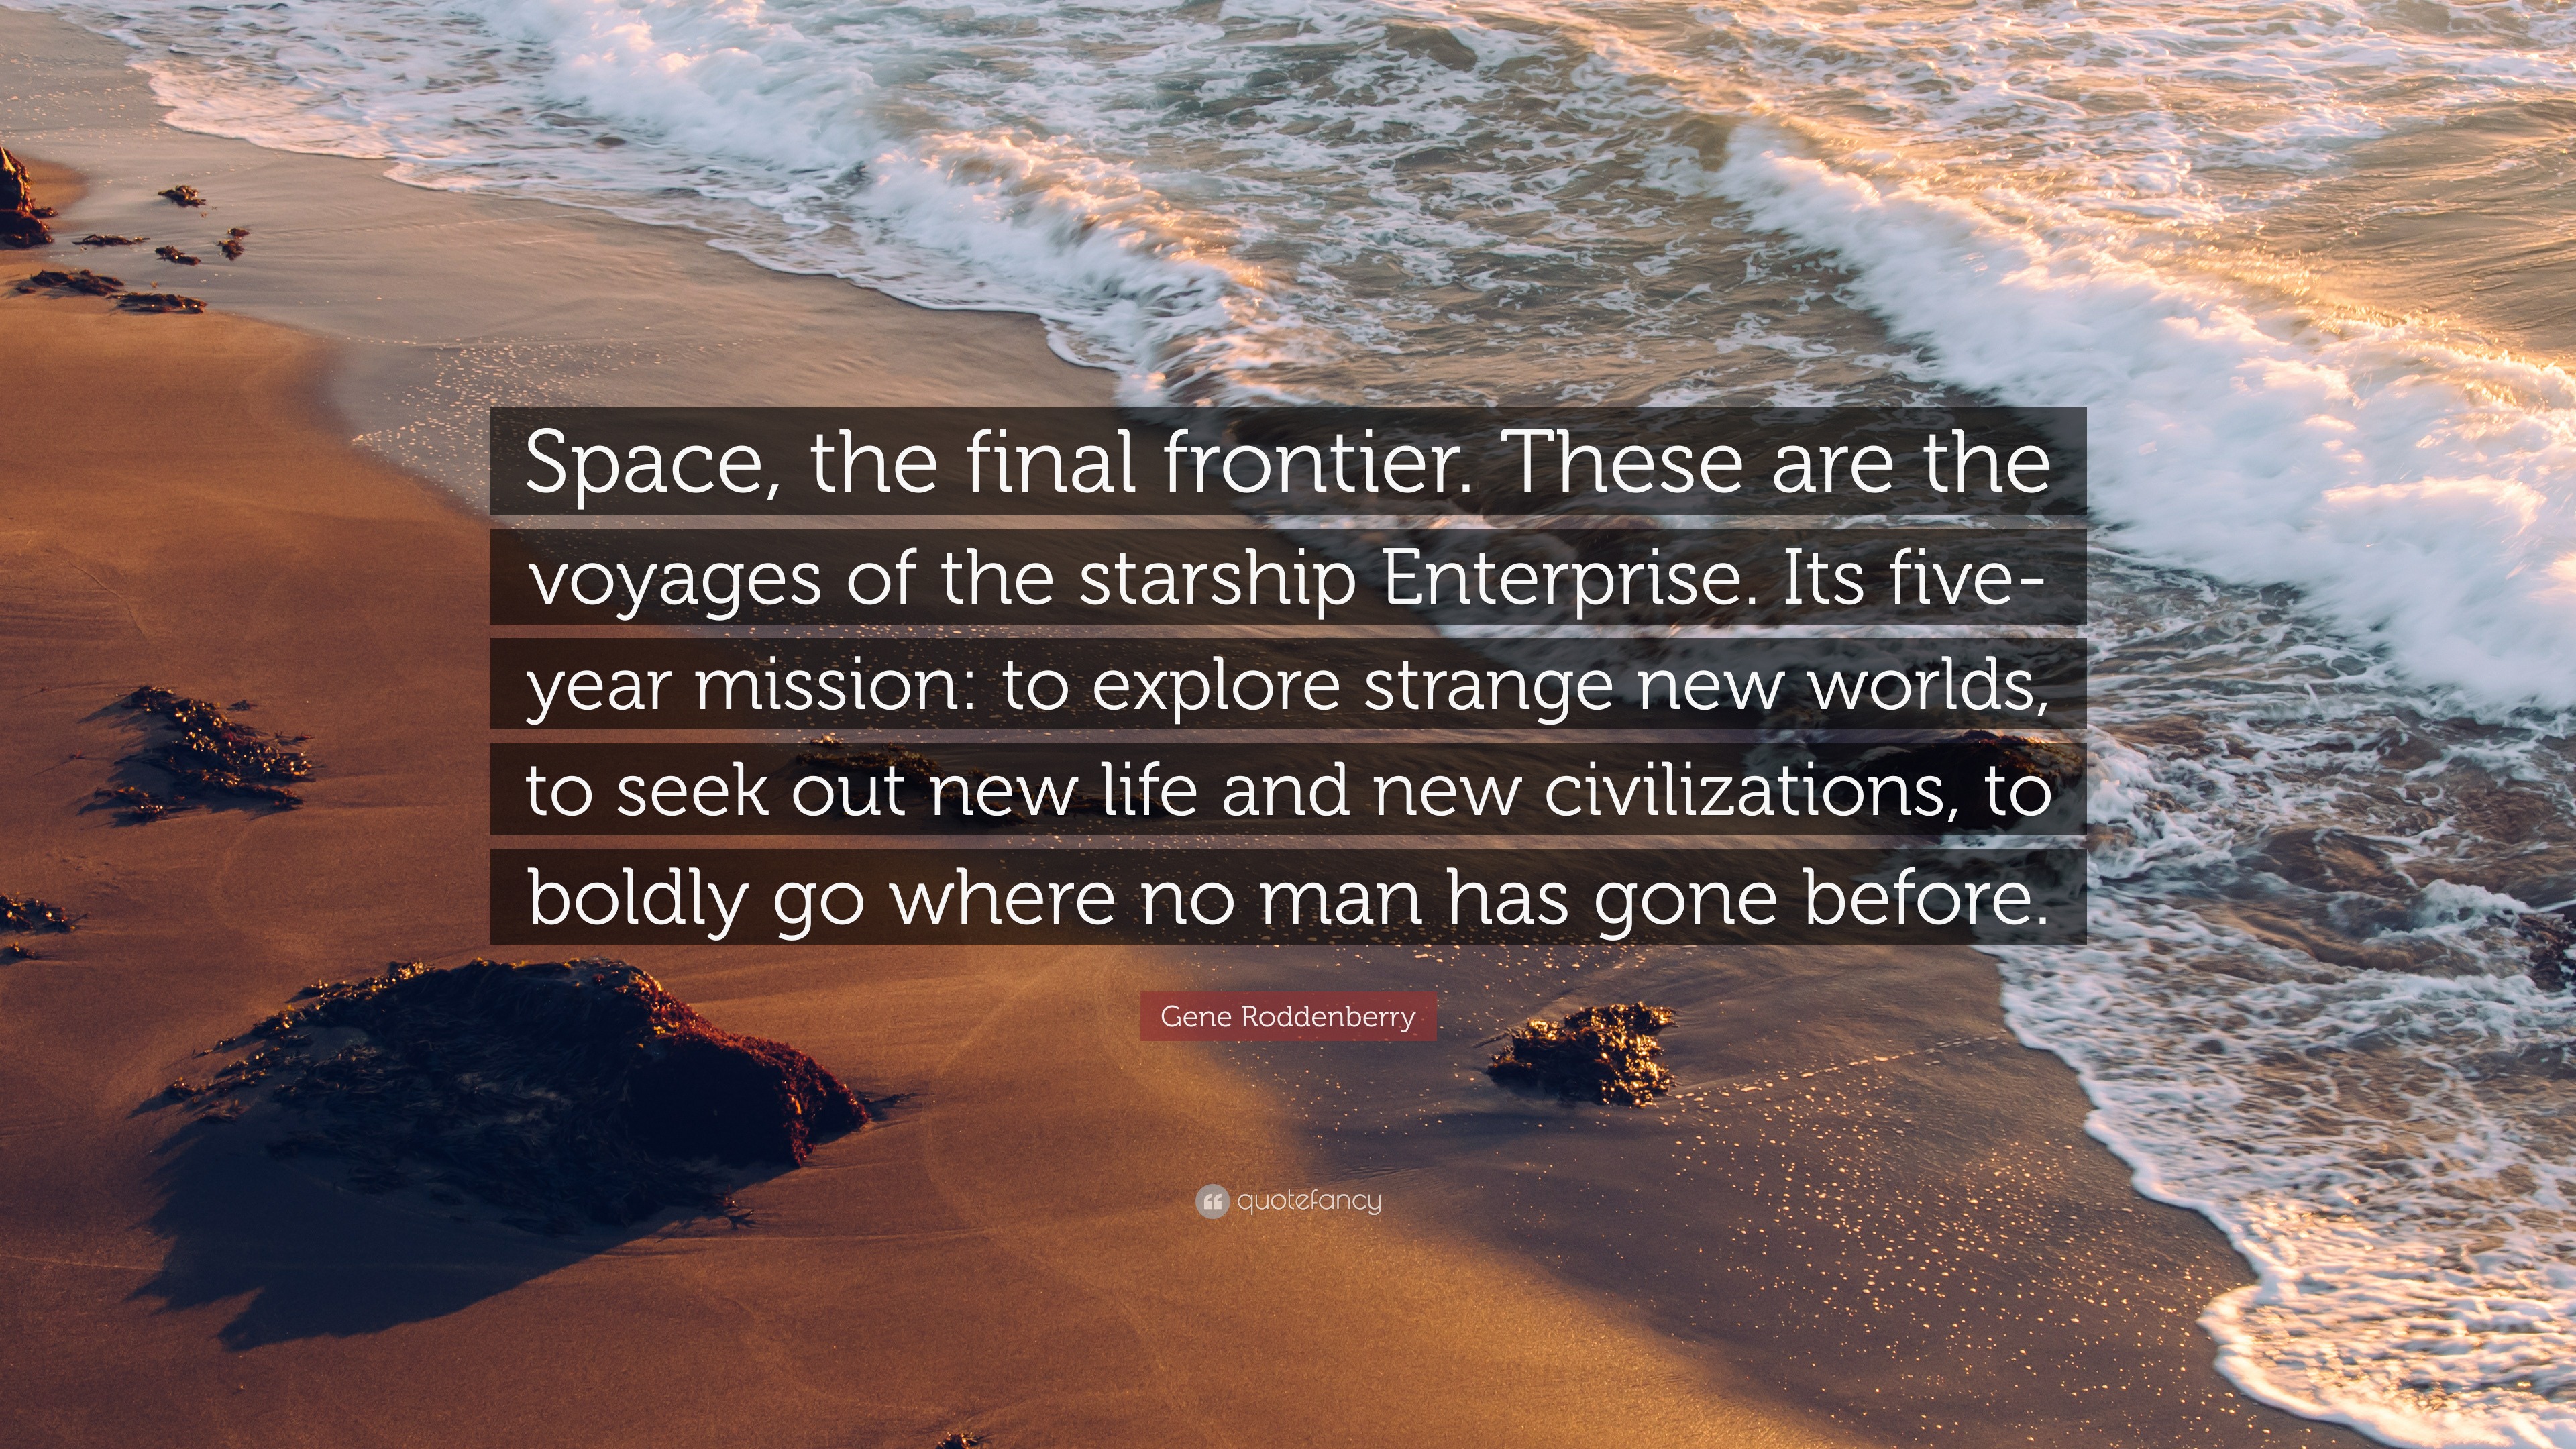 Gene Roddenberry Quote: “Space, The Final Frontier. These Are The Voyages Of The Starship Enterprise. Its Five-Year Mission: To Explore Strange N...”